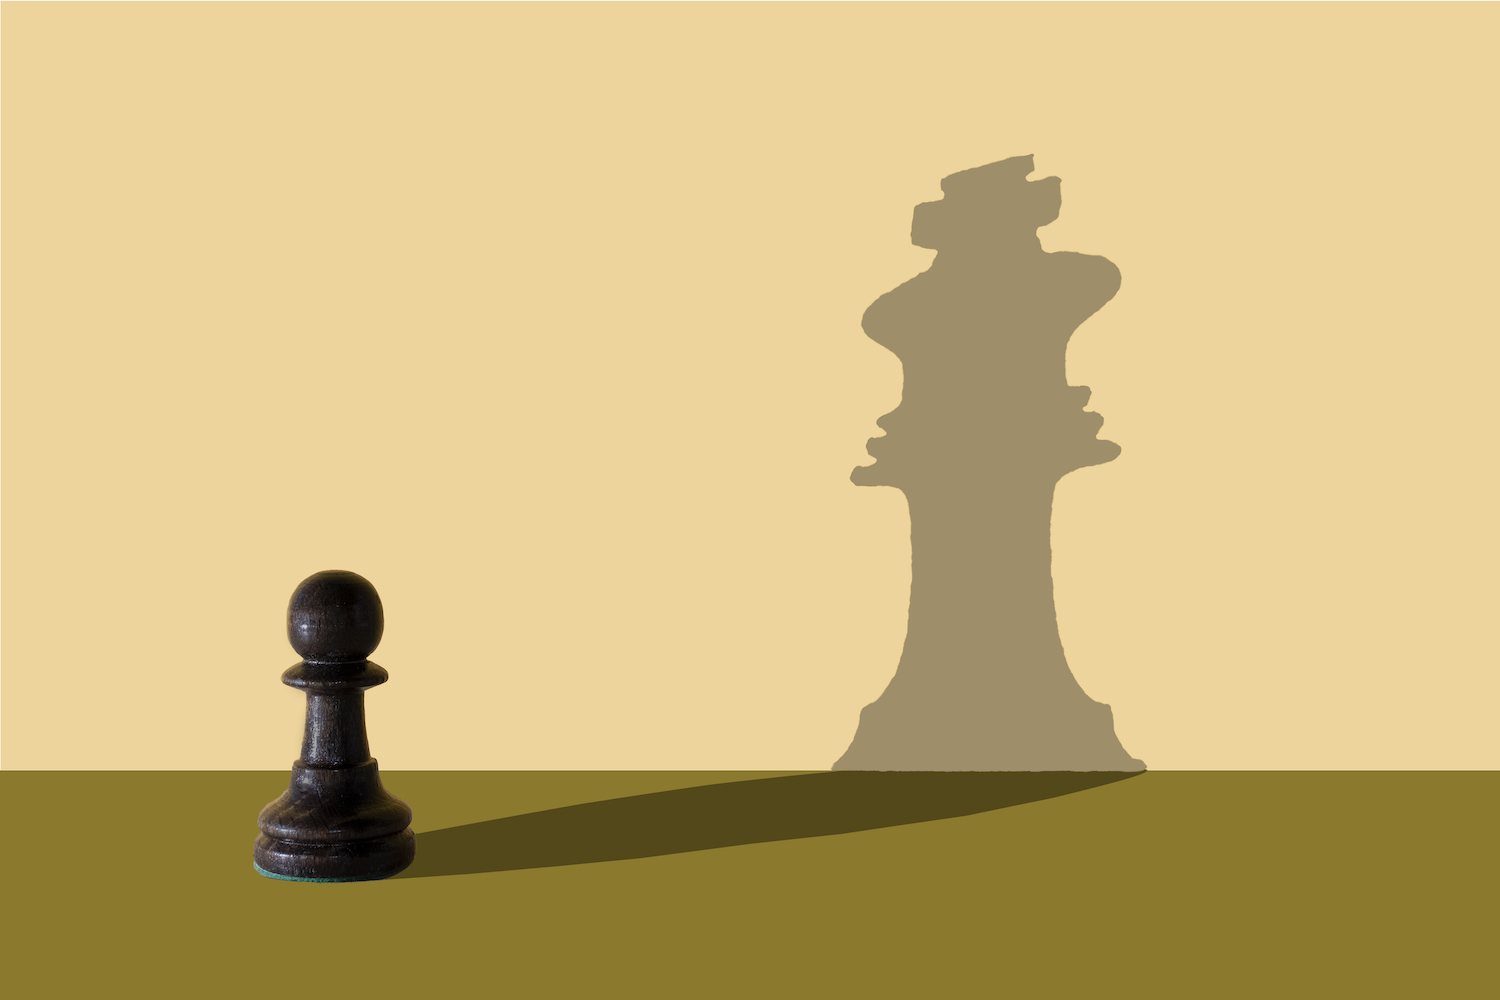 A chess piece casts the shadow of another piece on an image at the center of the photograph and illustration.